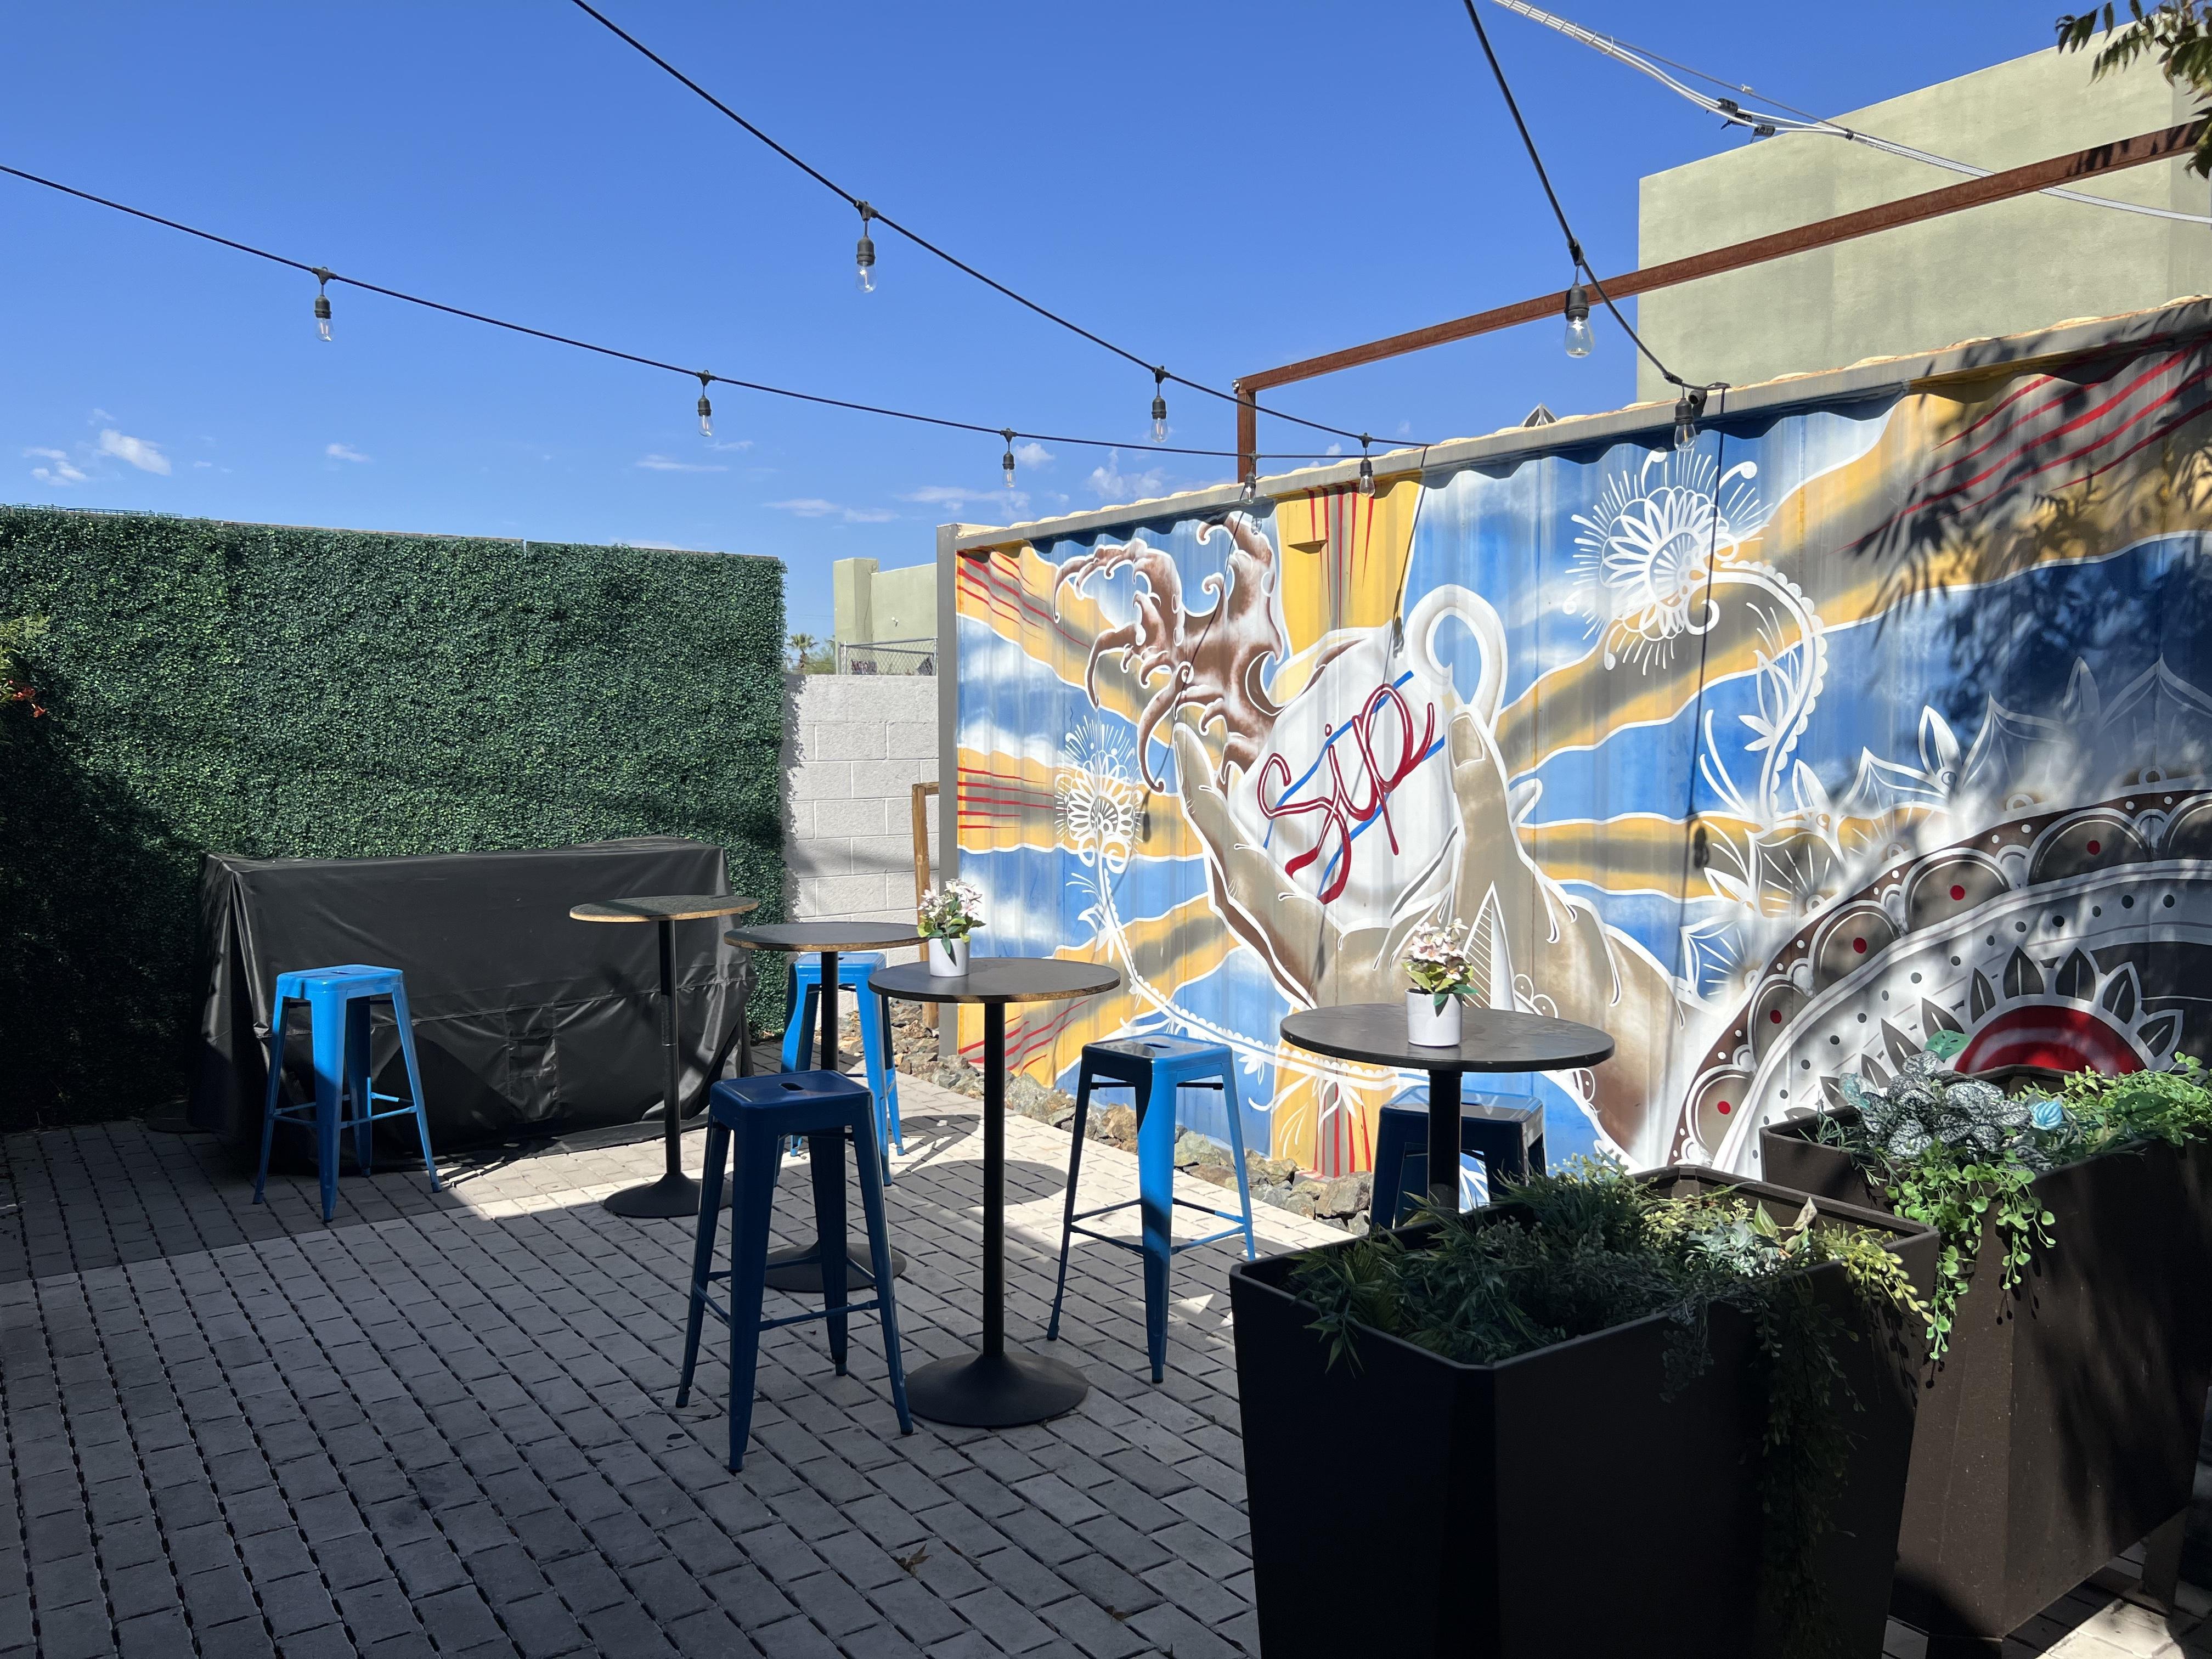 When the sun sets, Sip transforms into a vibrant cocktail bar with a brewery inspired vibe & unique concoctions - the perfect setting for a night out with friends or a casual date night.